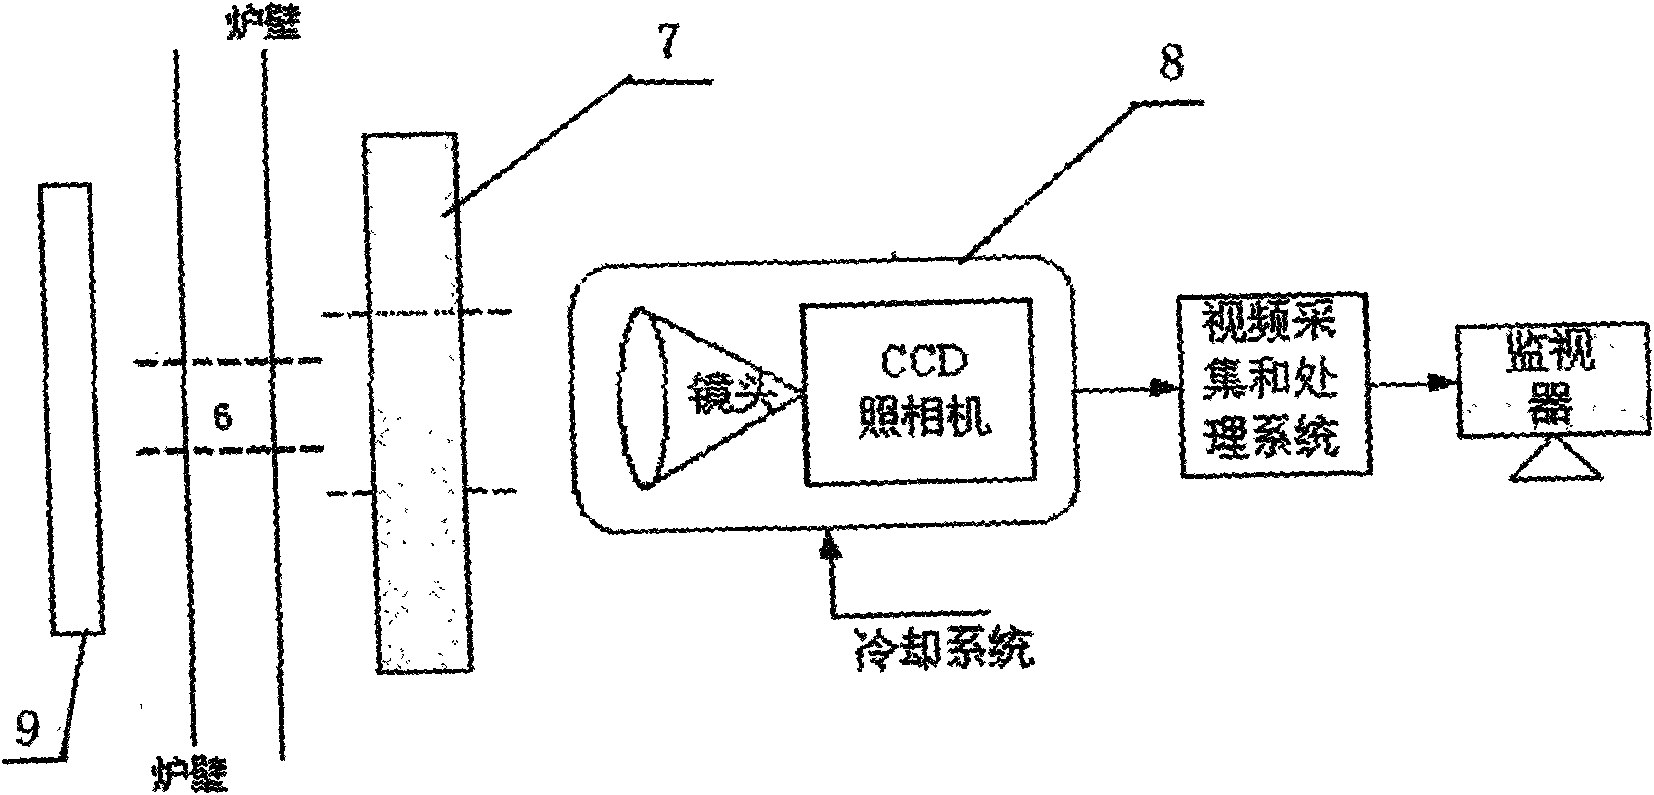 Video monitoring device for polysilicon growth